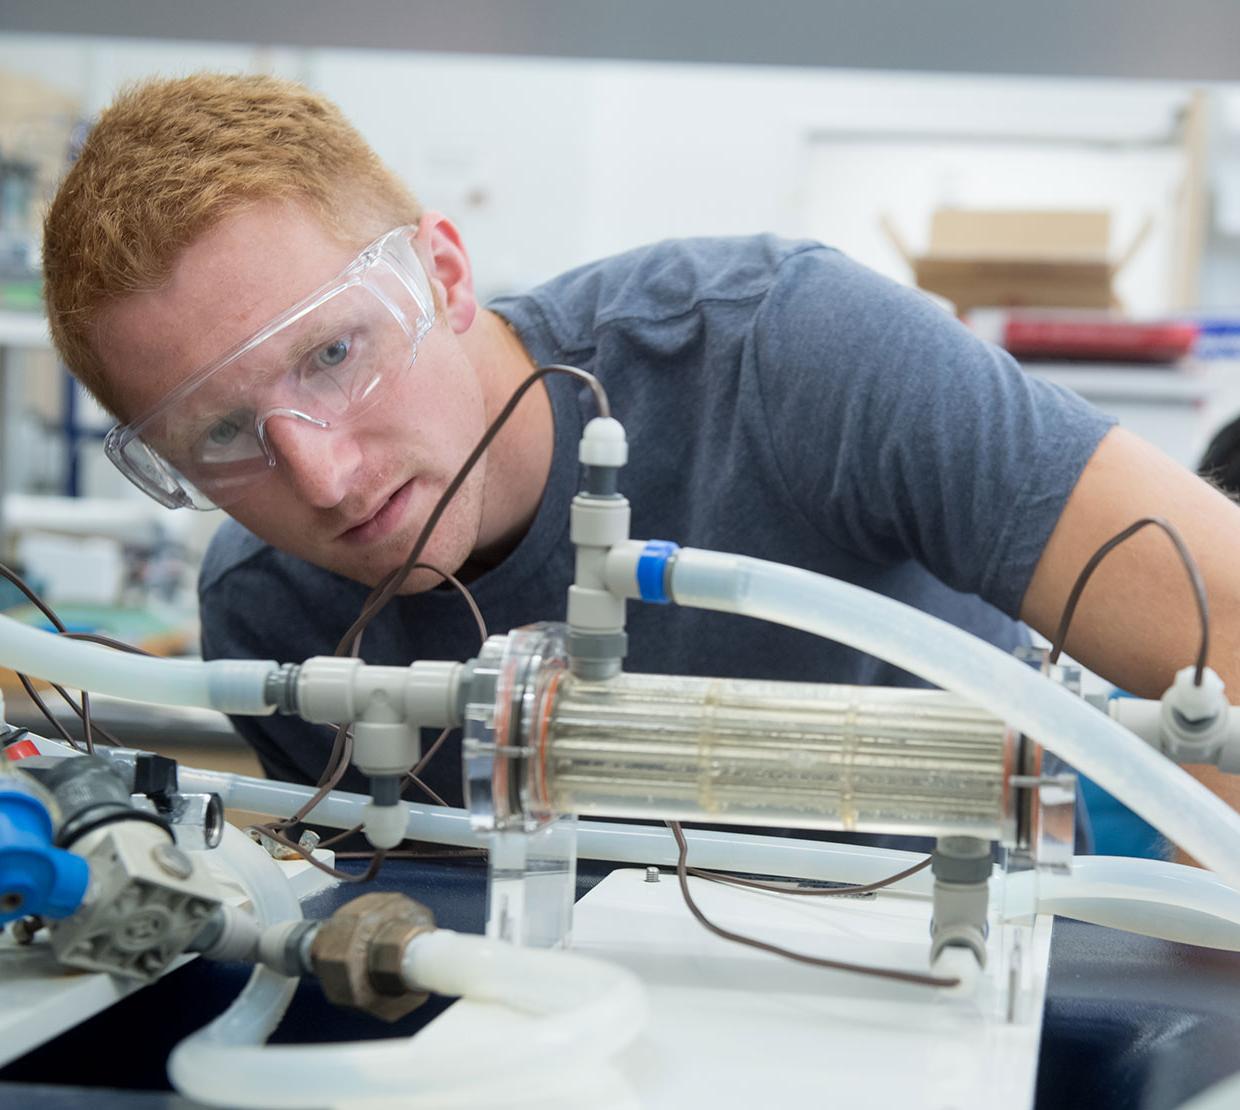 male student working with lab equipment